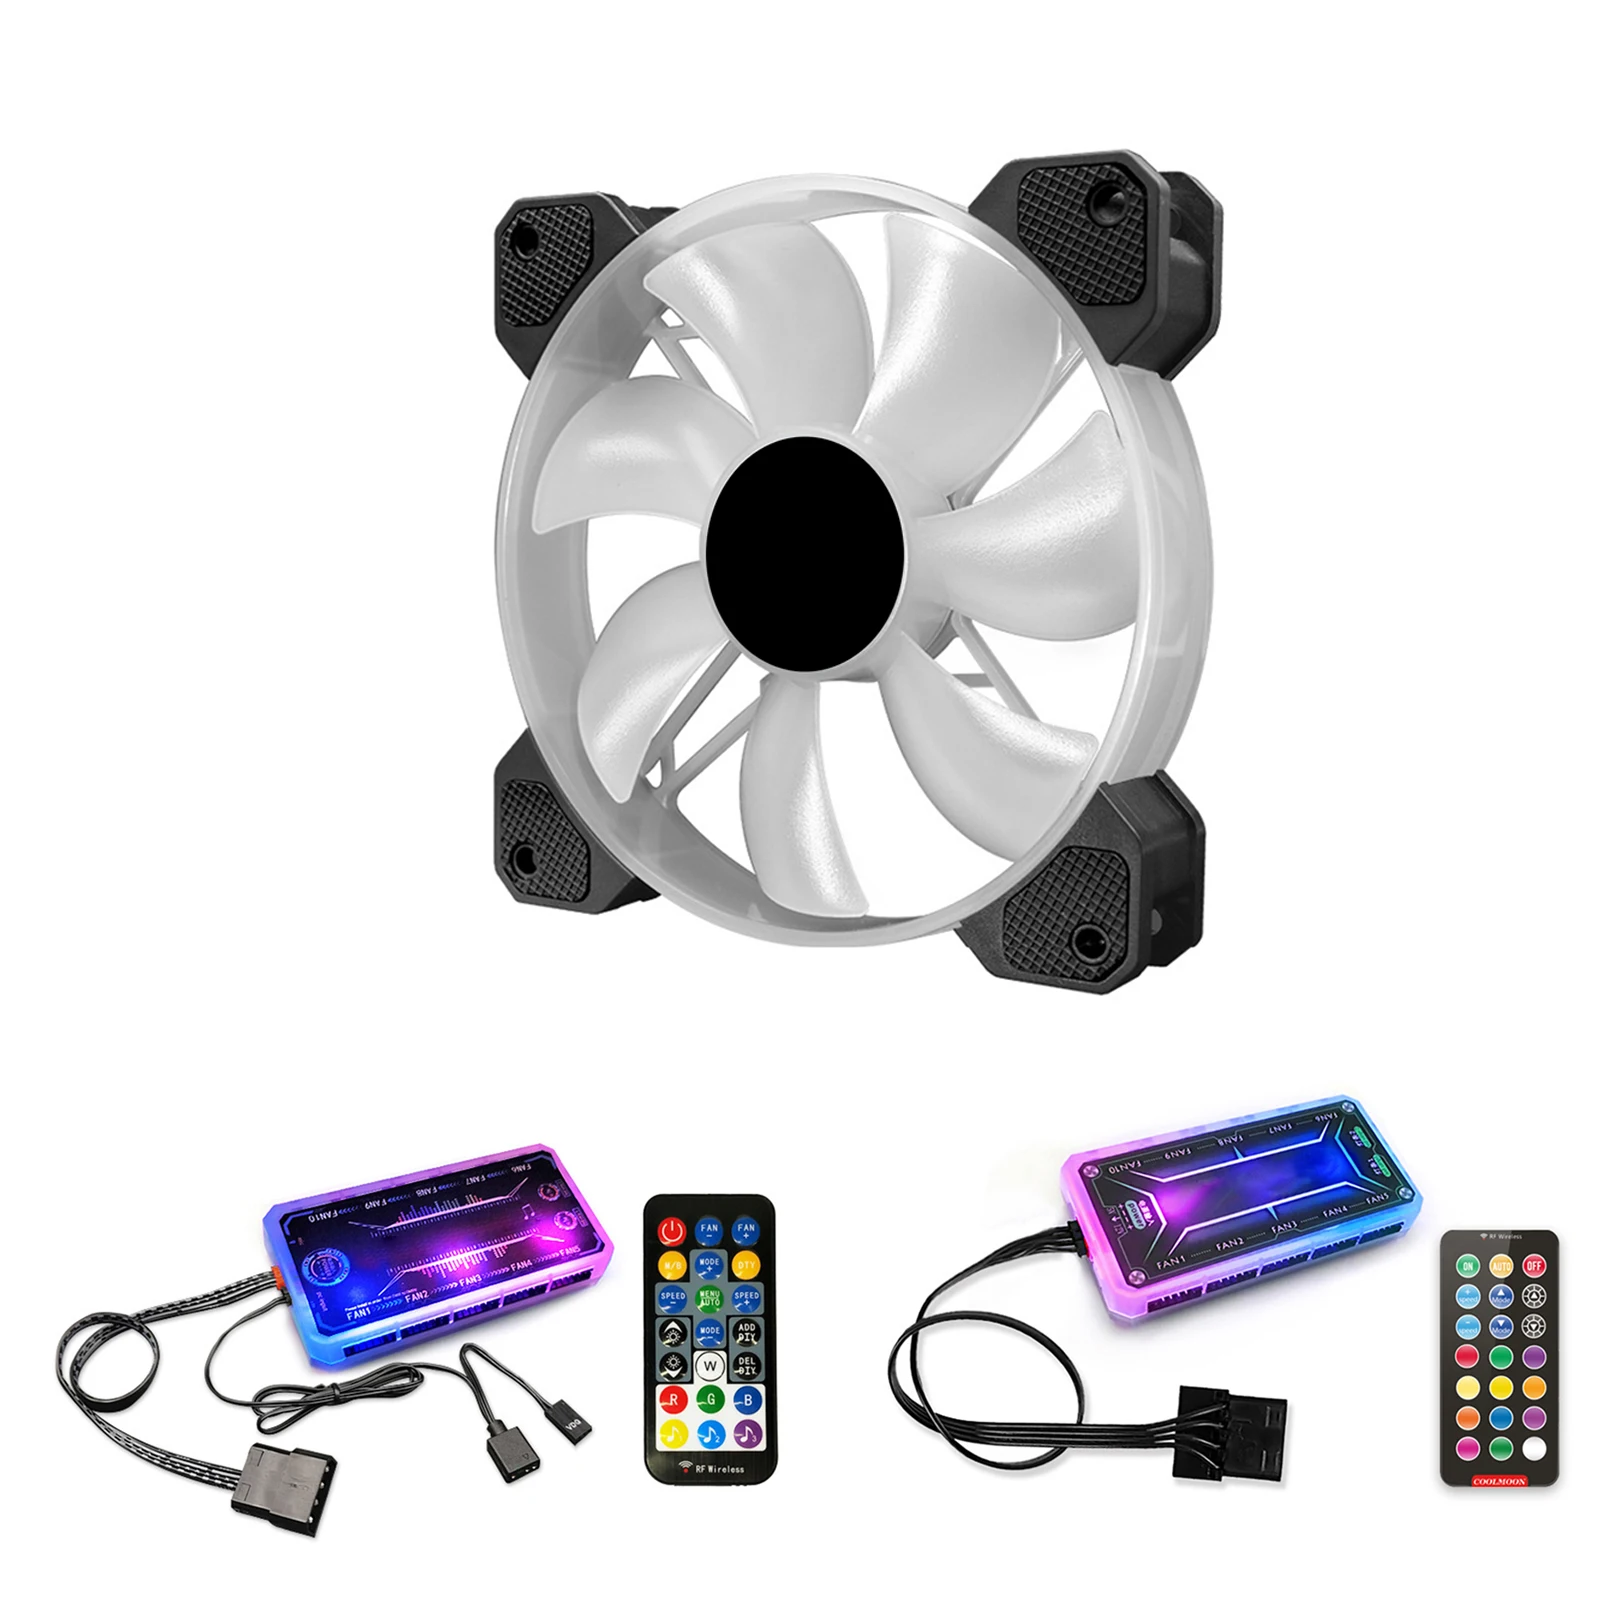 

PC Fan 120mm Slim 15mm Thickness, Quiet Computer Cooling Fans, 53.6CFM 120X15mm PWM Controlled with De-vibration Rubber